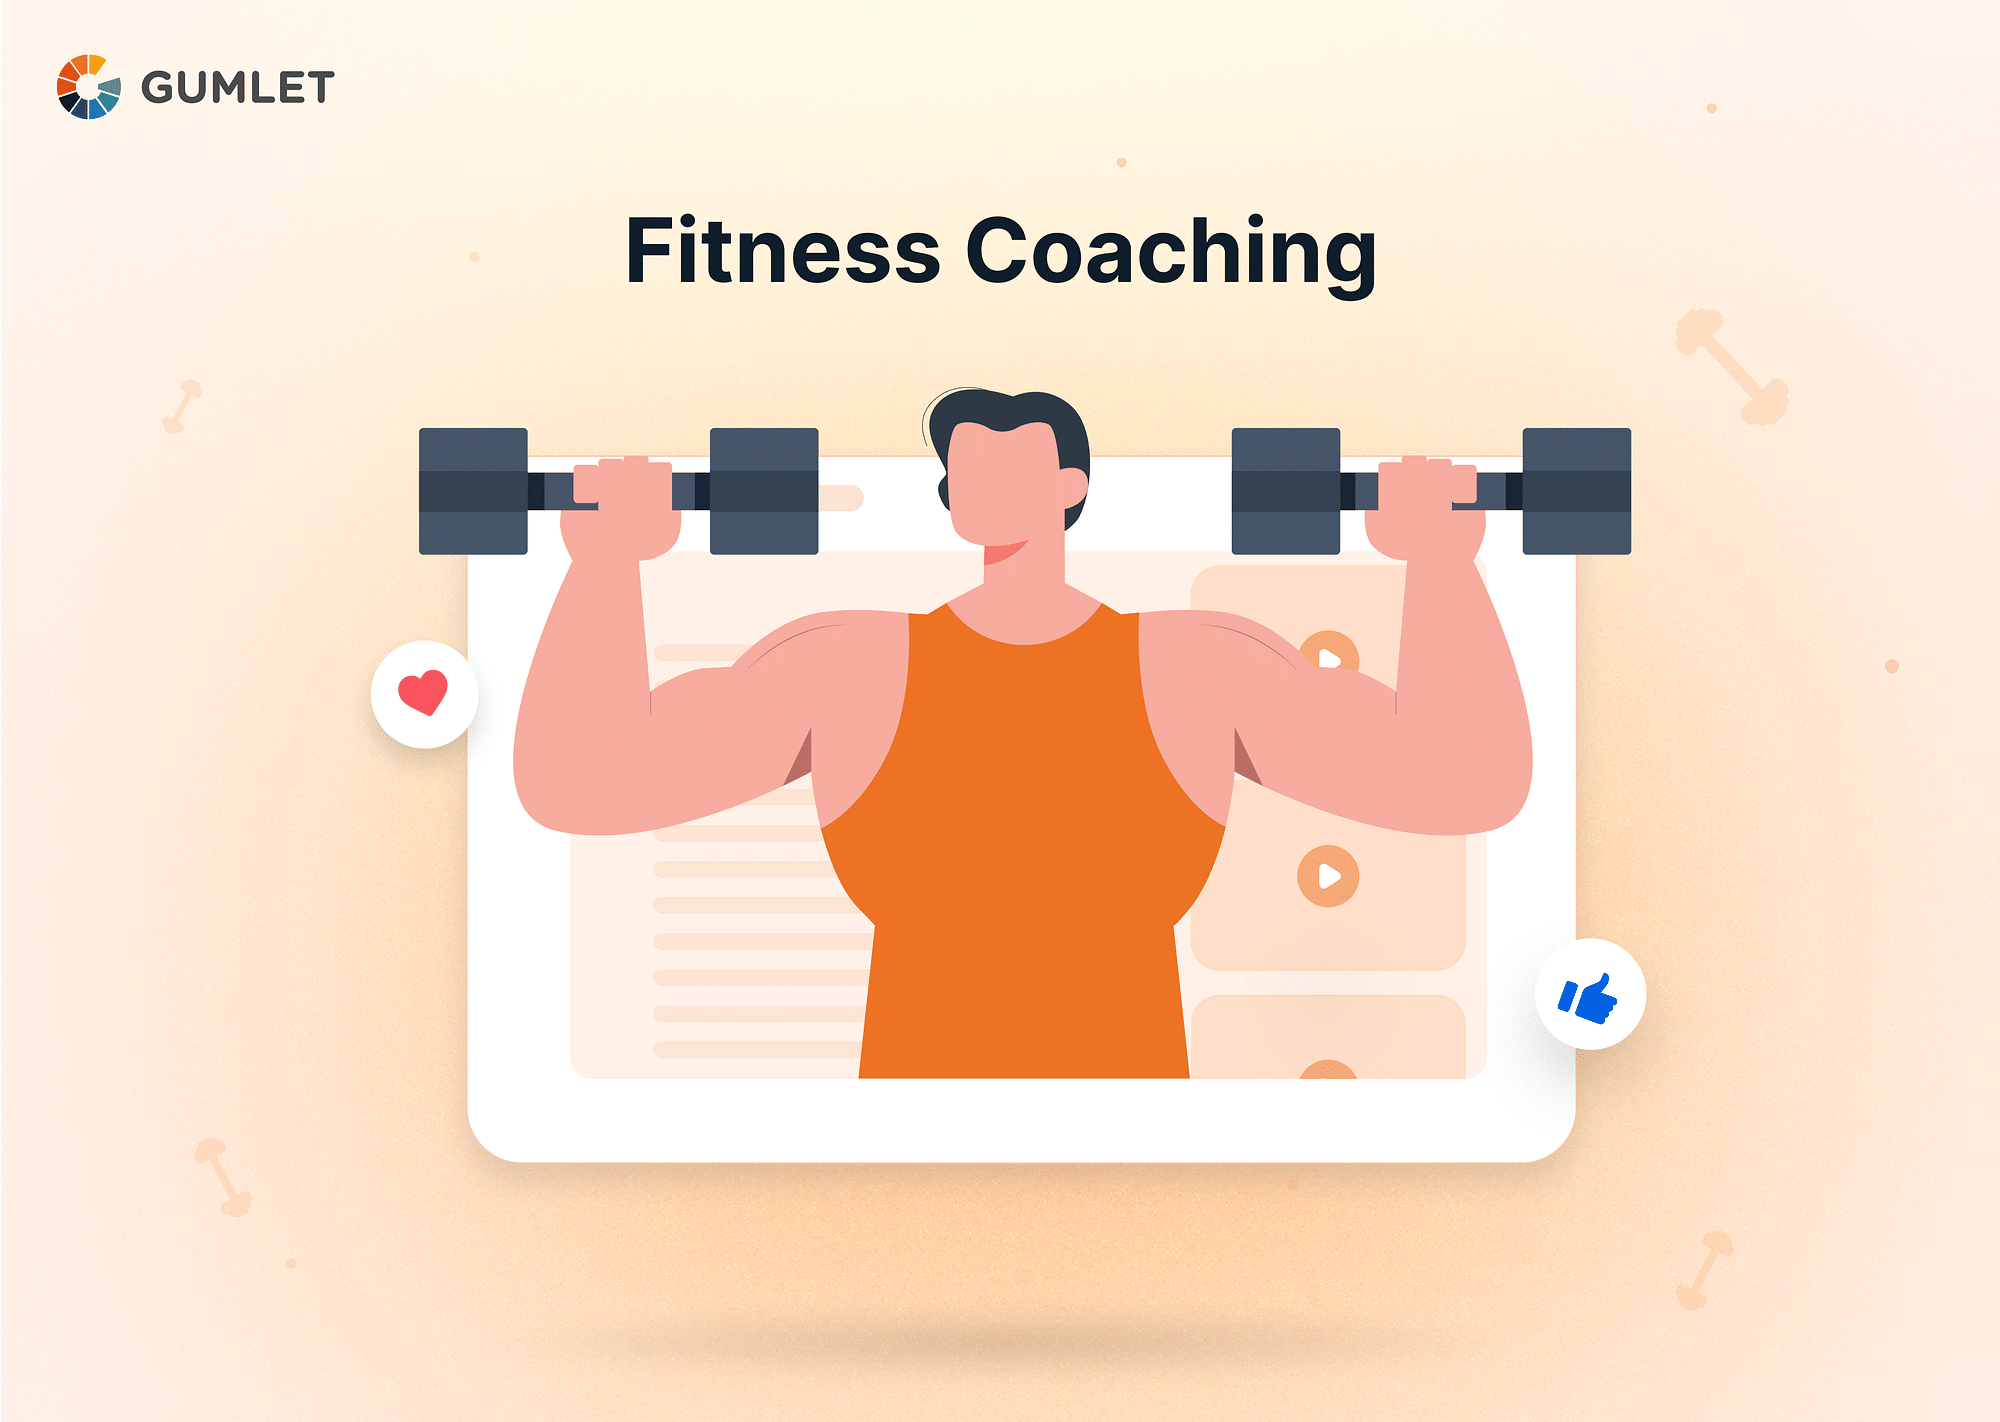 How to Start an Online Fitness Coaching Business?